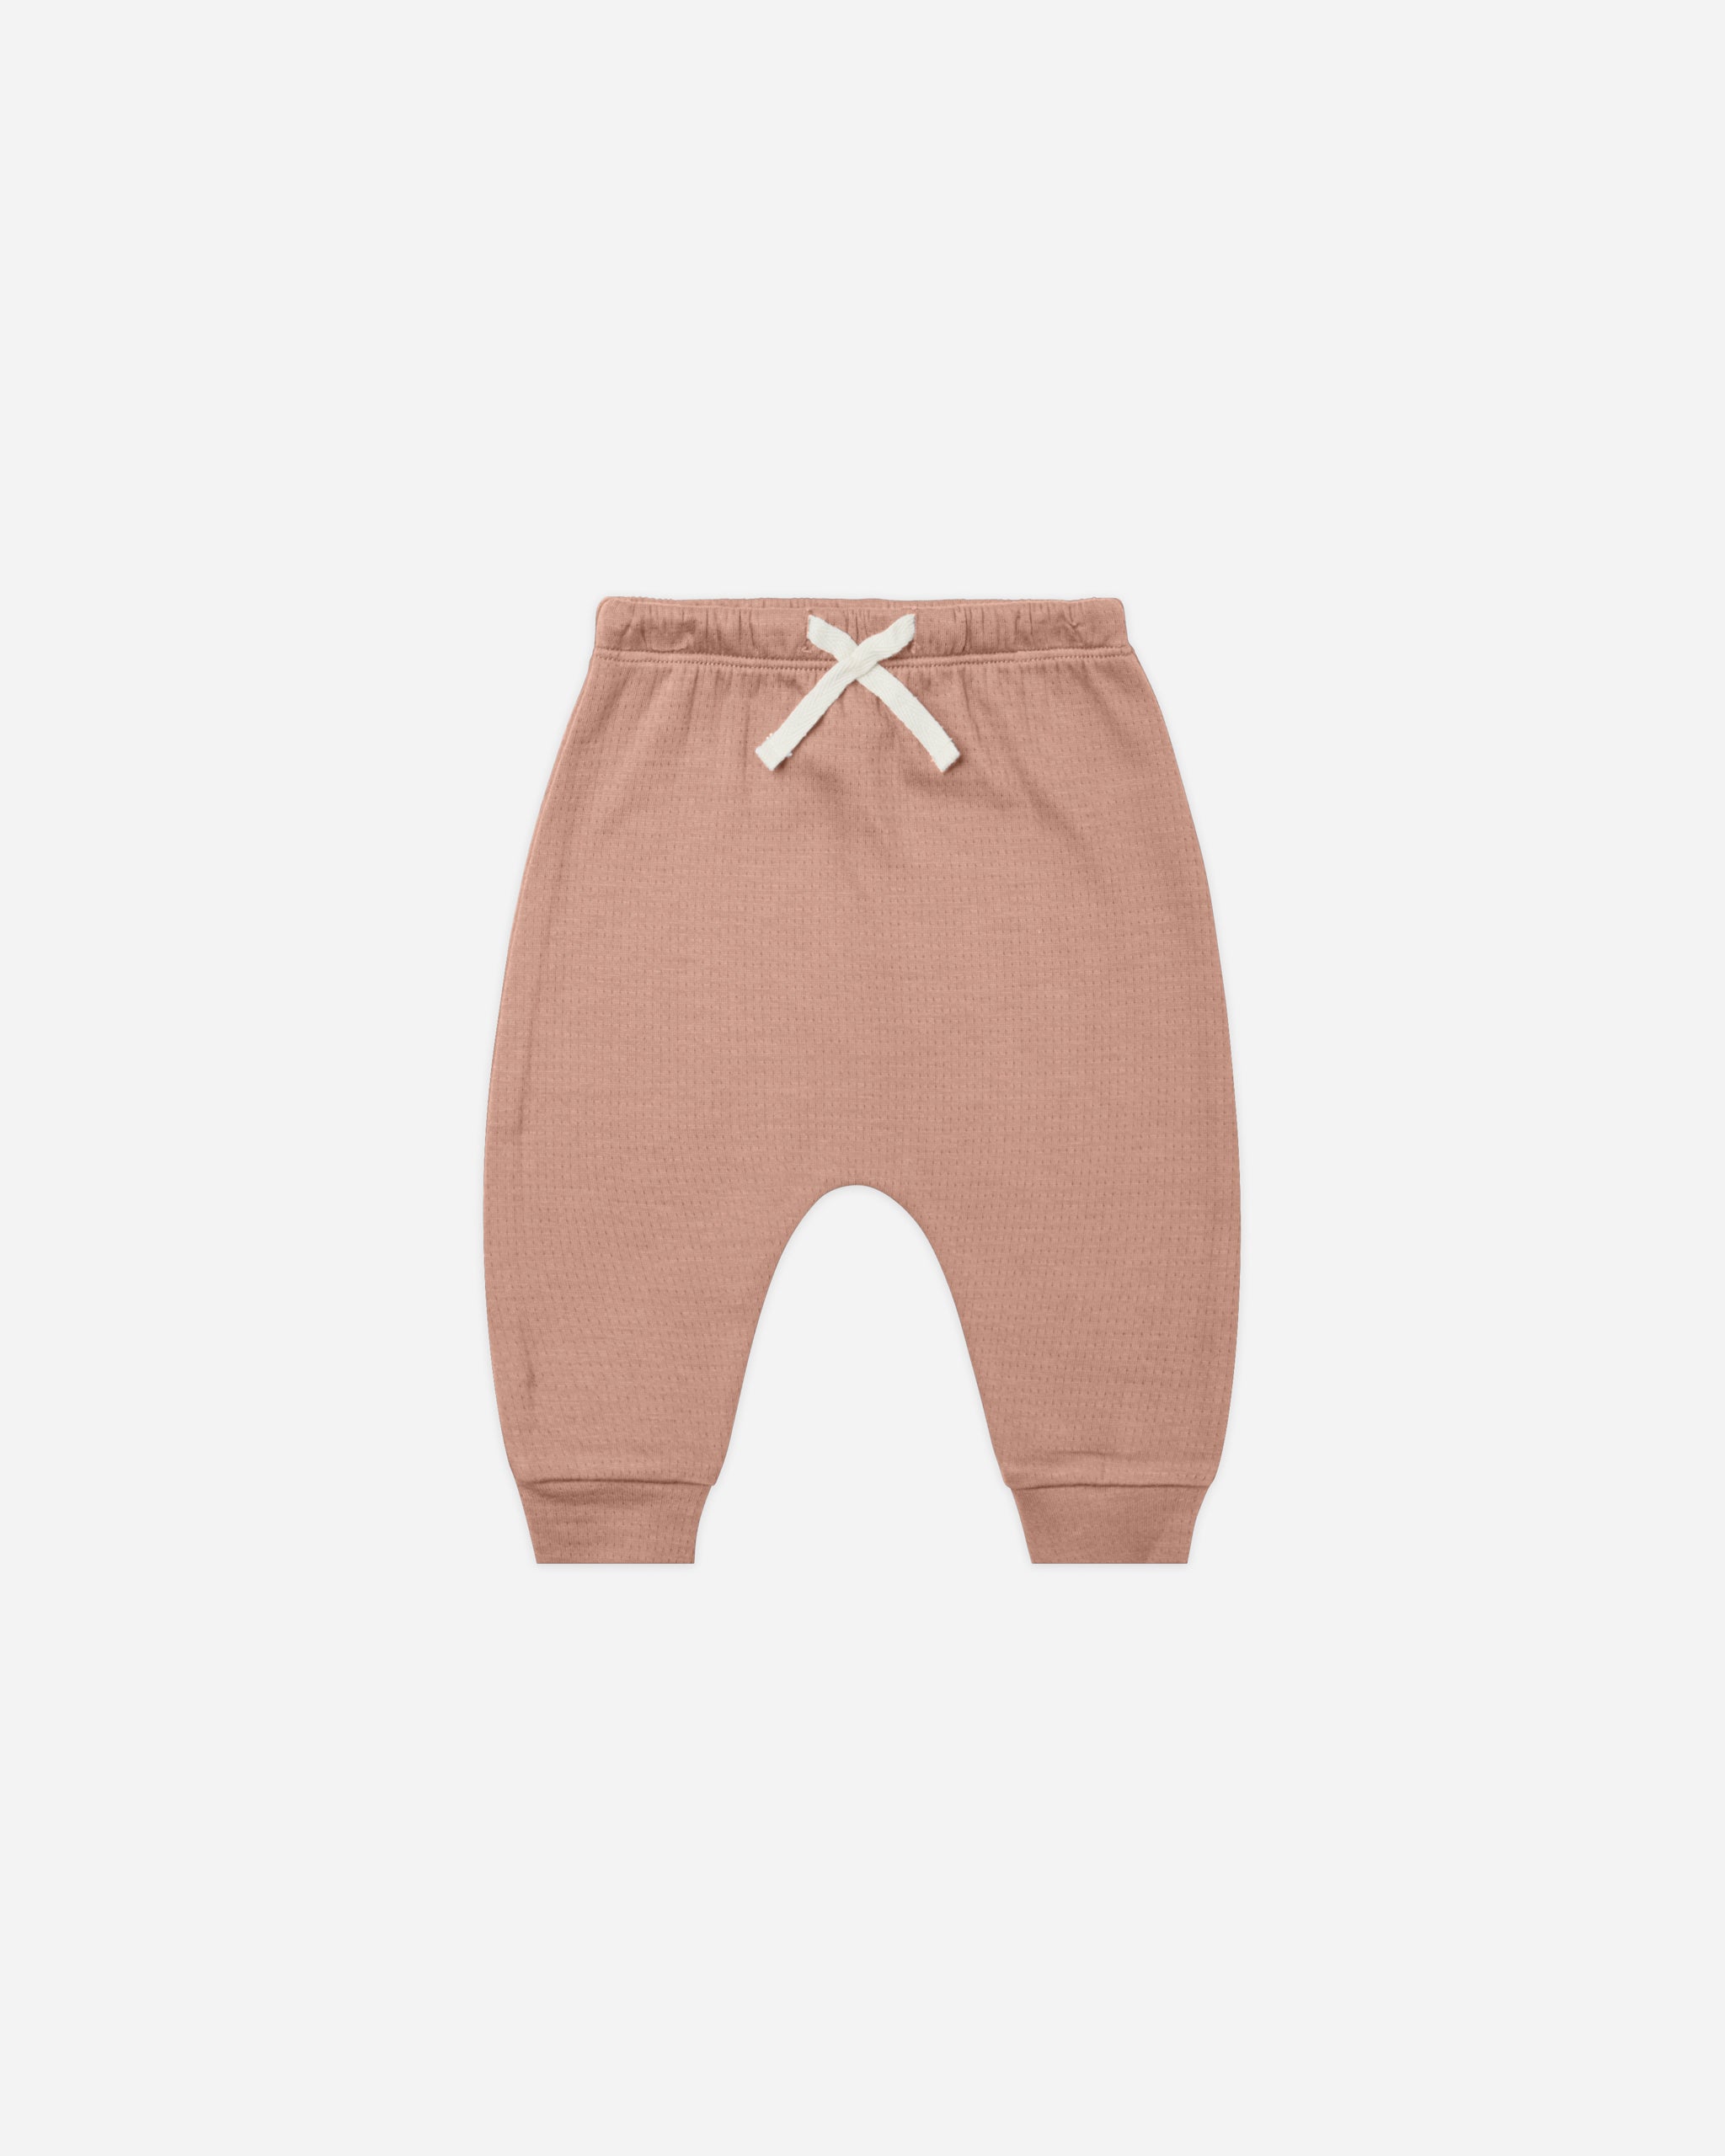 Pointelle Sweatpant || Rose - Rylee + Cru | Kids Clothes | Trendy Baby Clothes | Modern Infant Outfits |